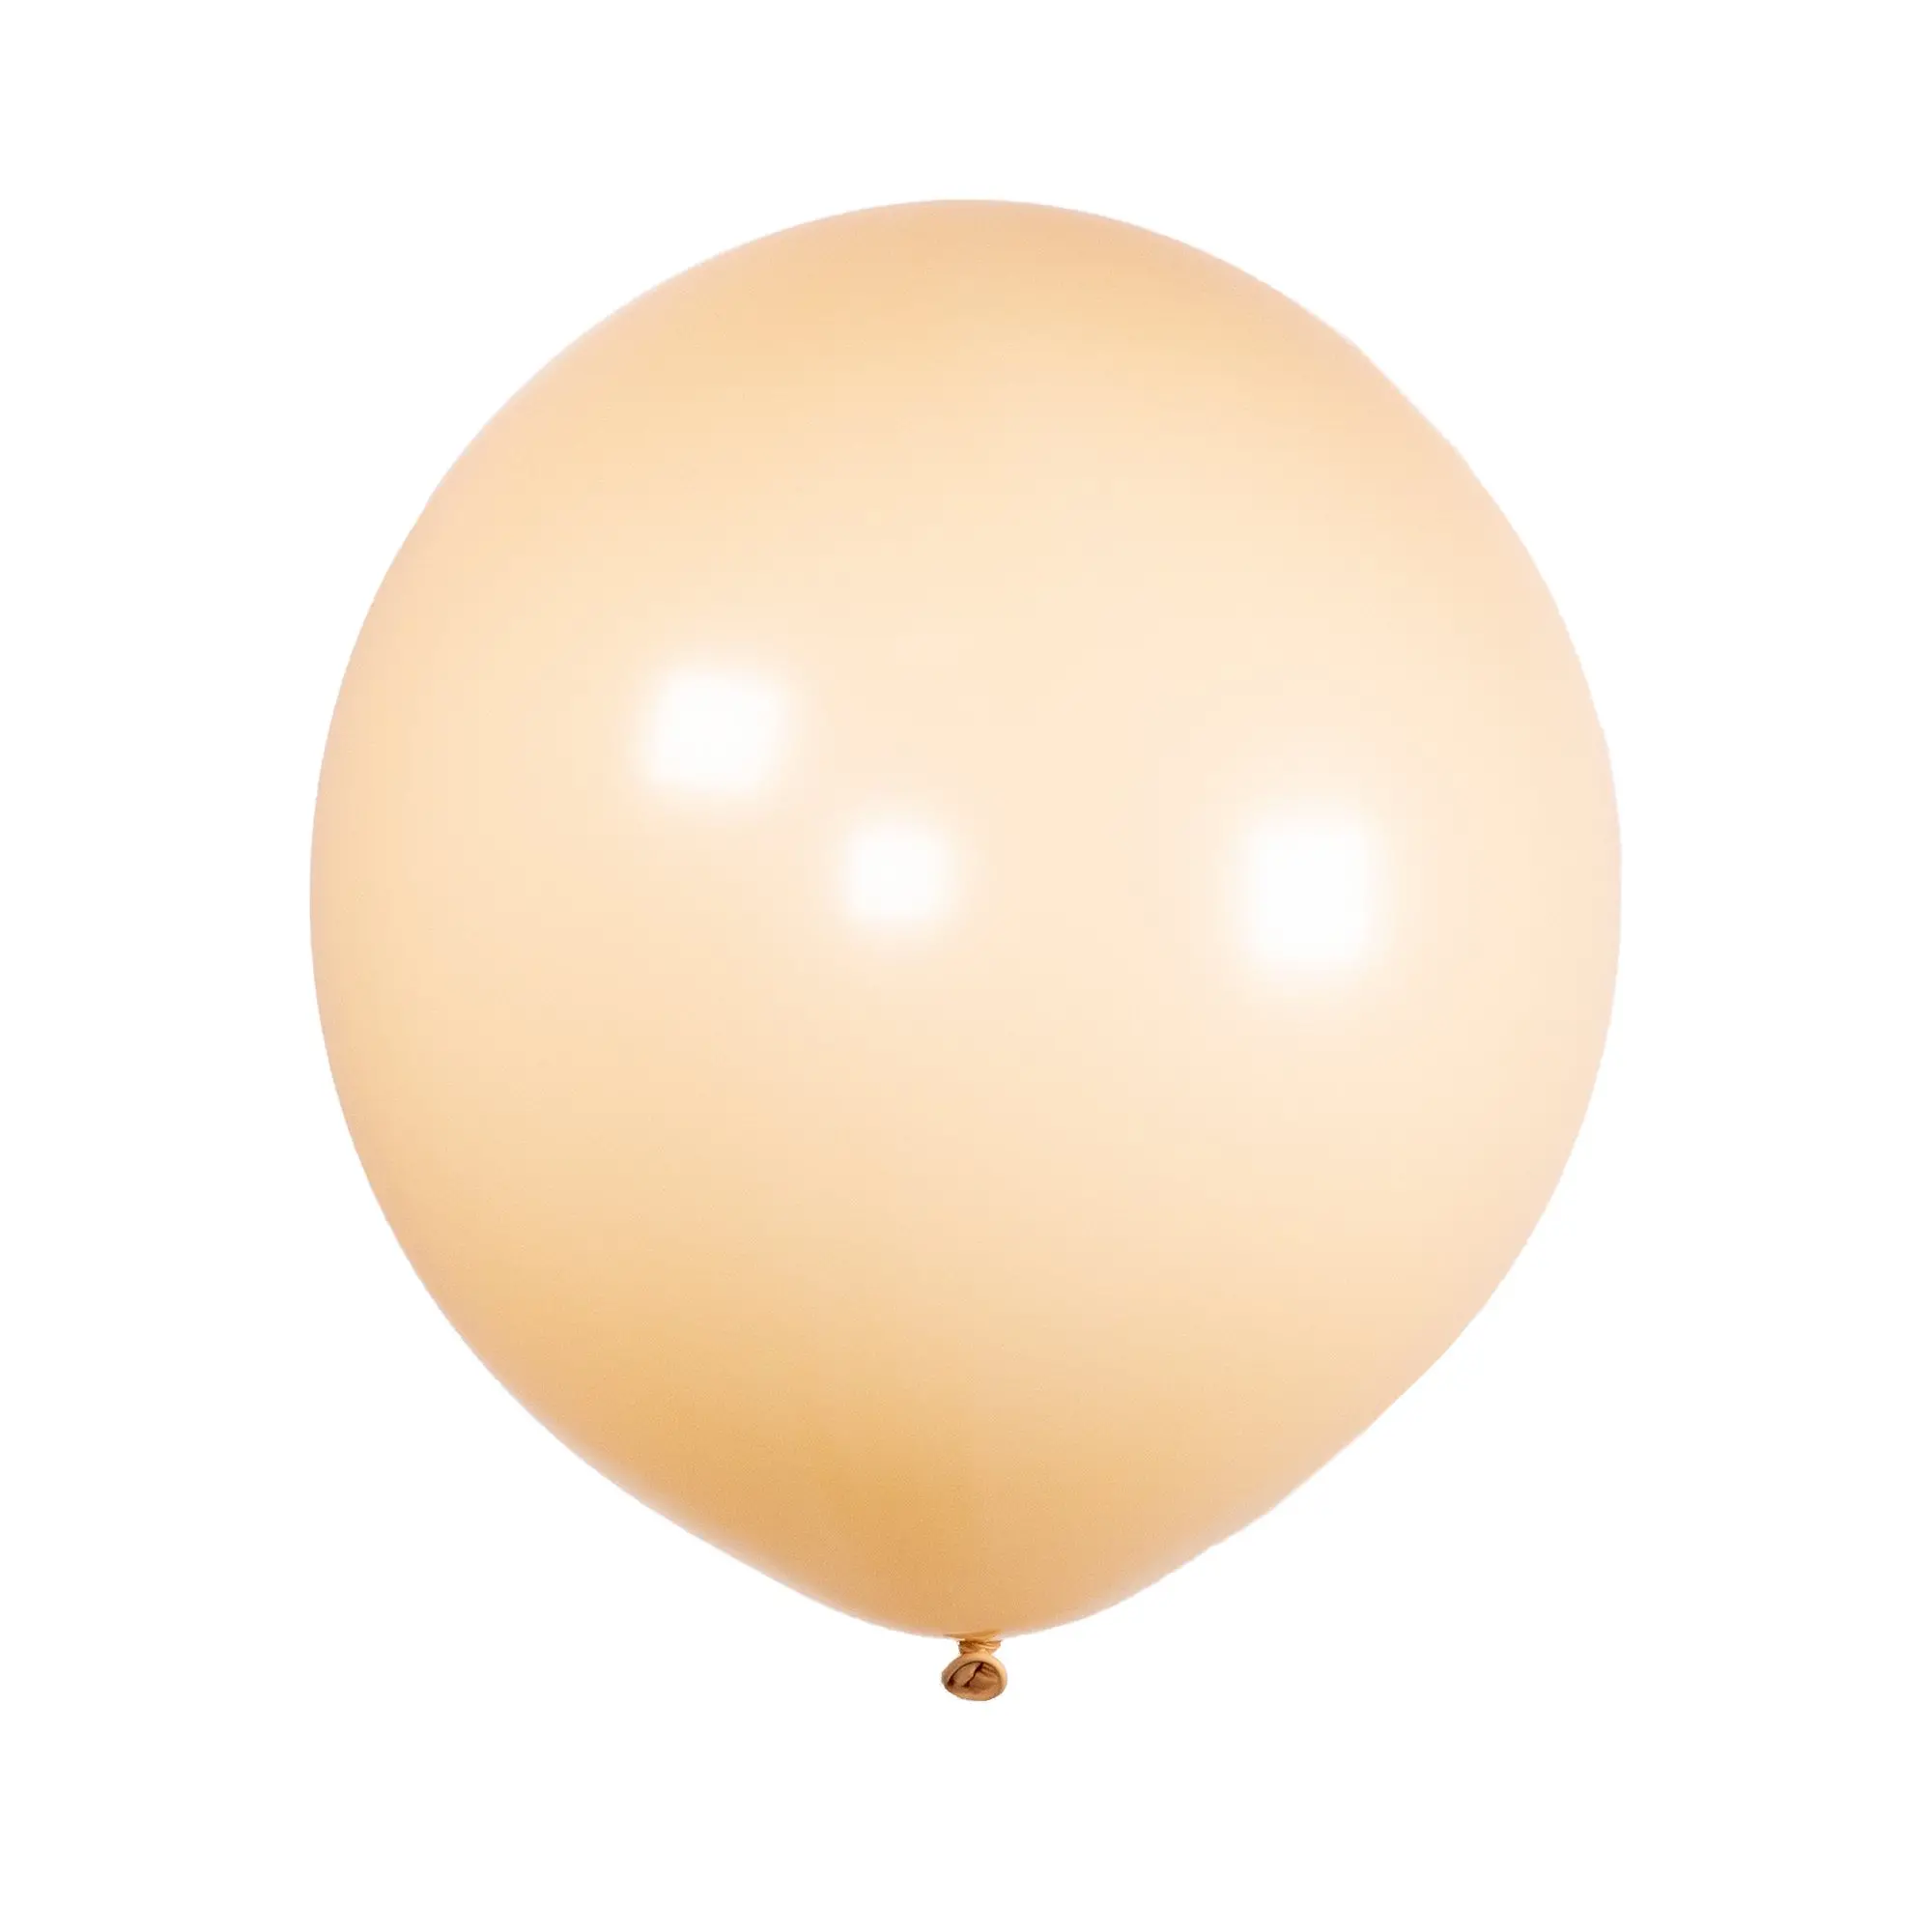 Latex colorful balloon – 48 cm - Nude Beige